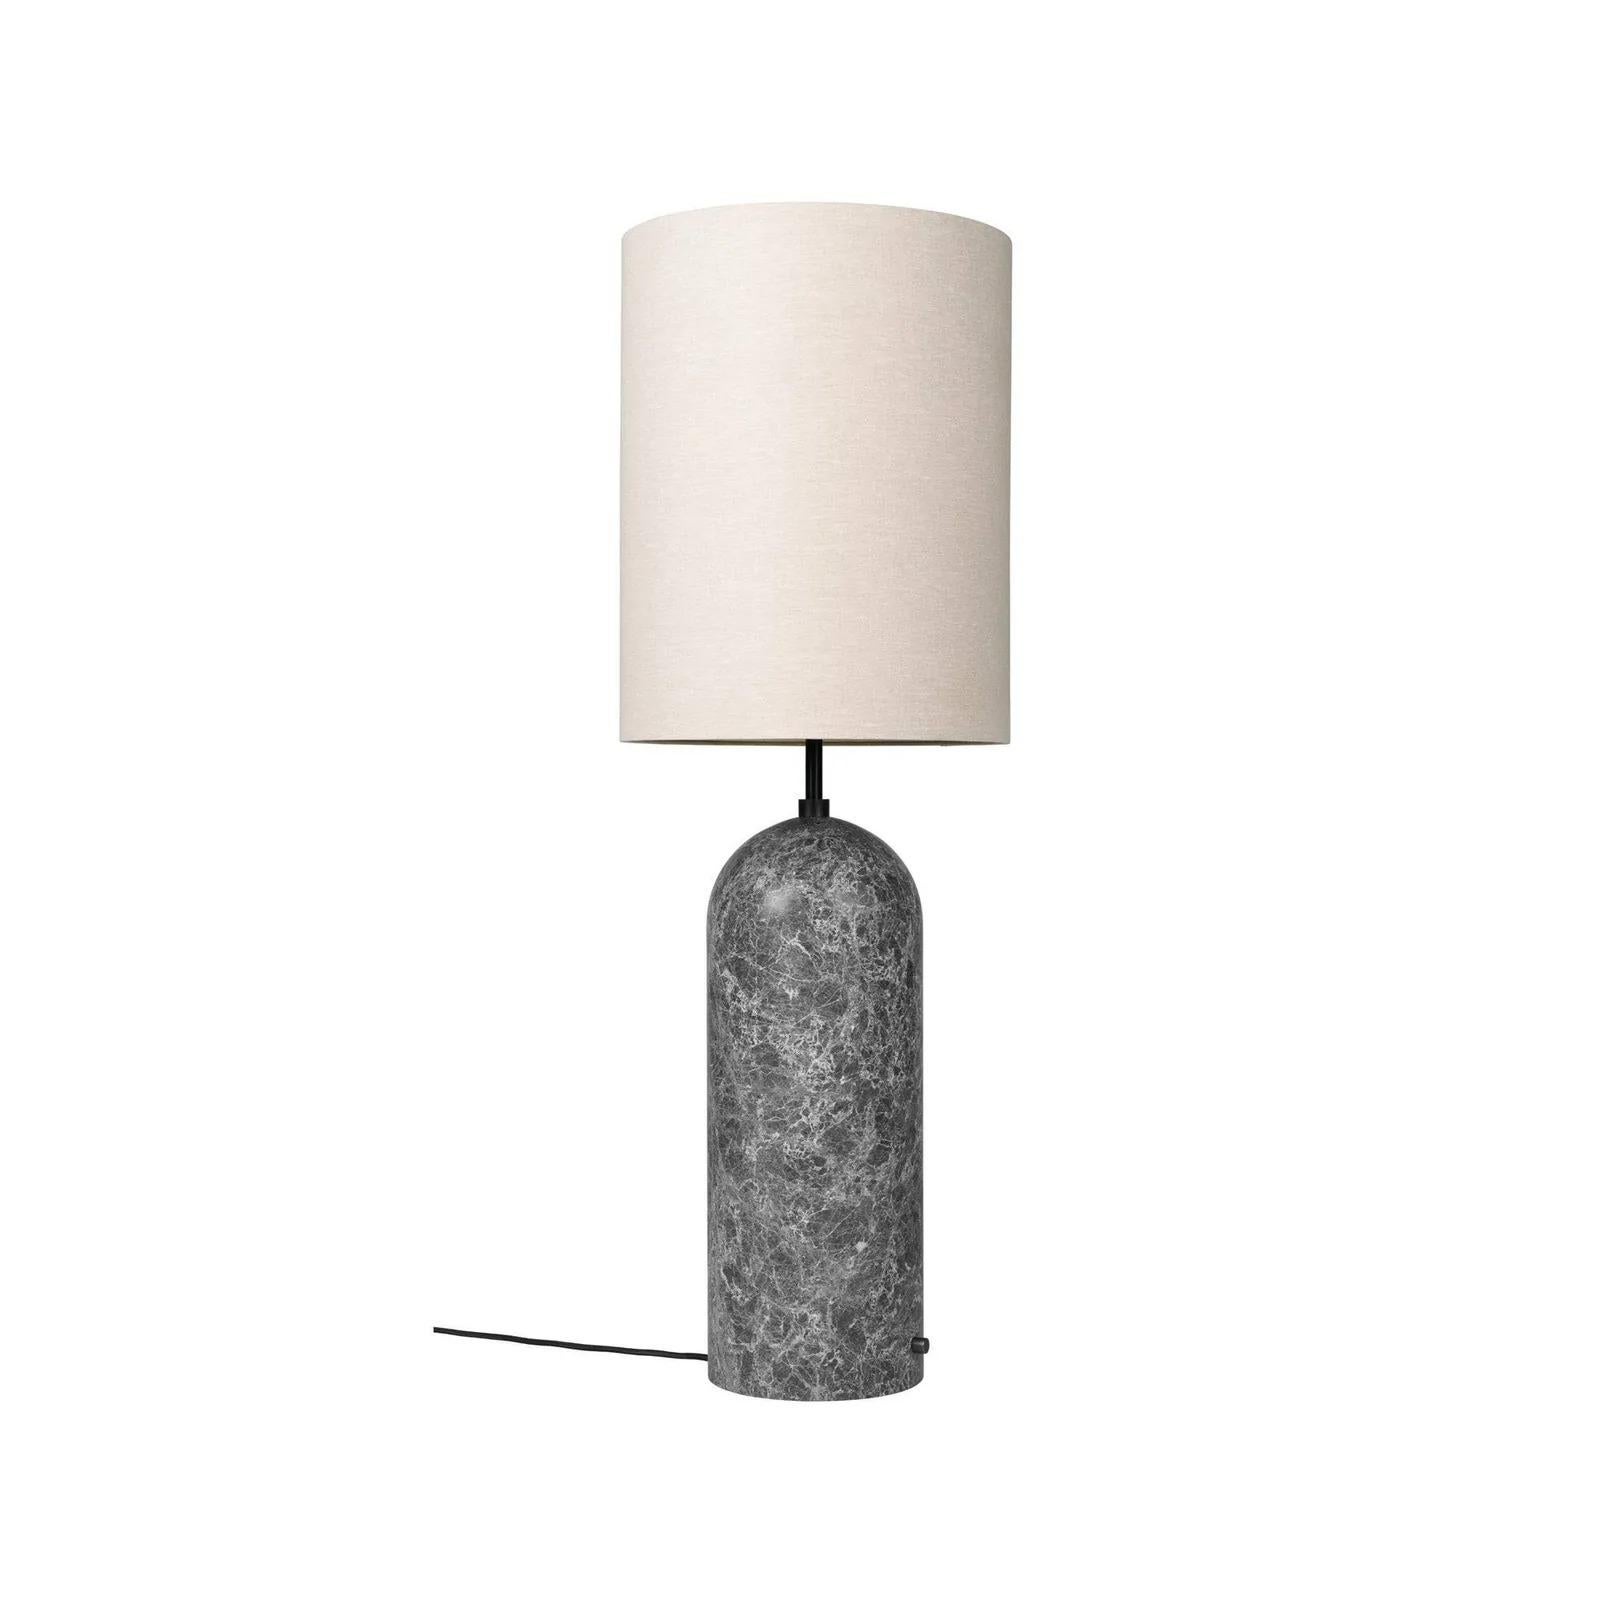 Post-Modern Gravity Floor Lamp - XL High, Black Marble, Canvas For Sale